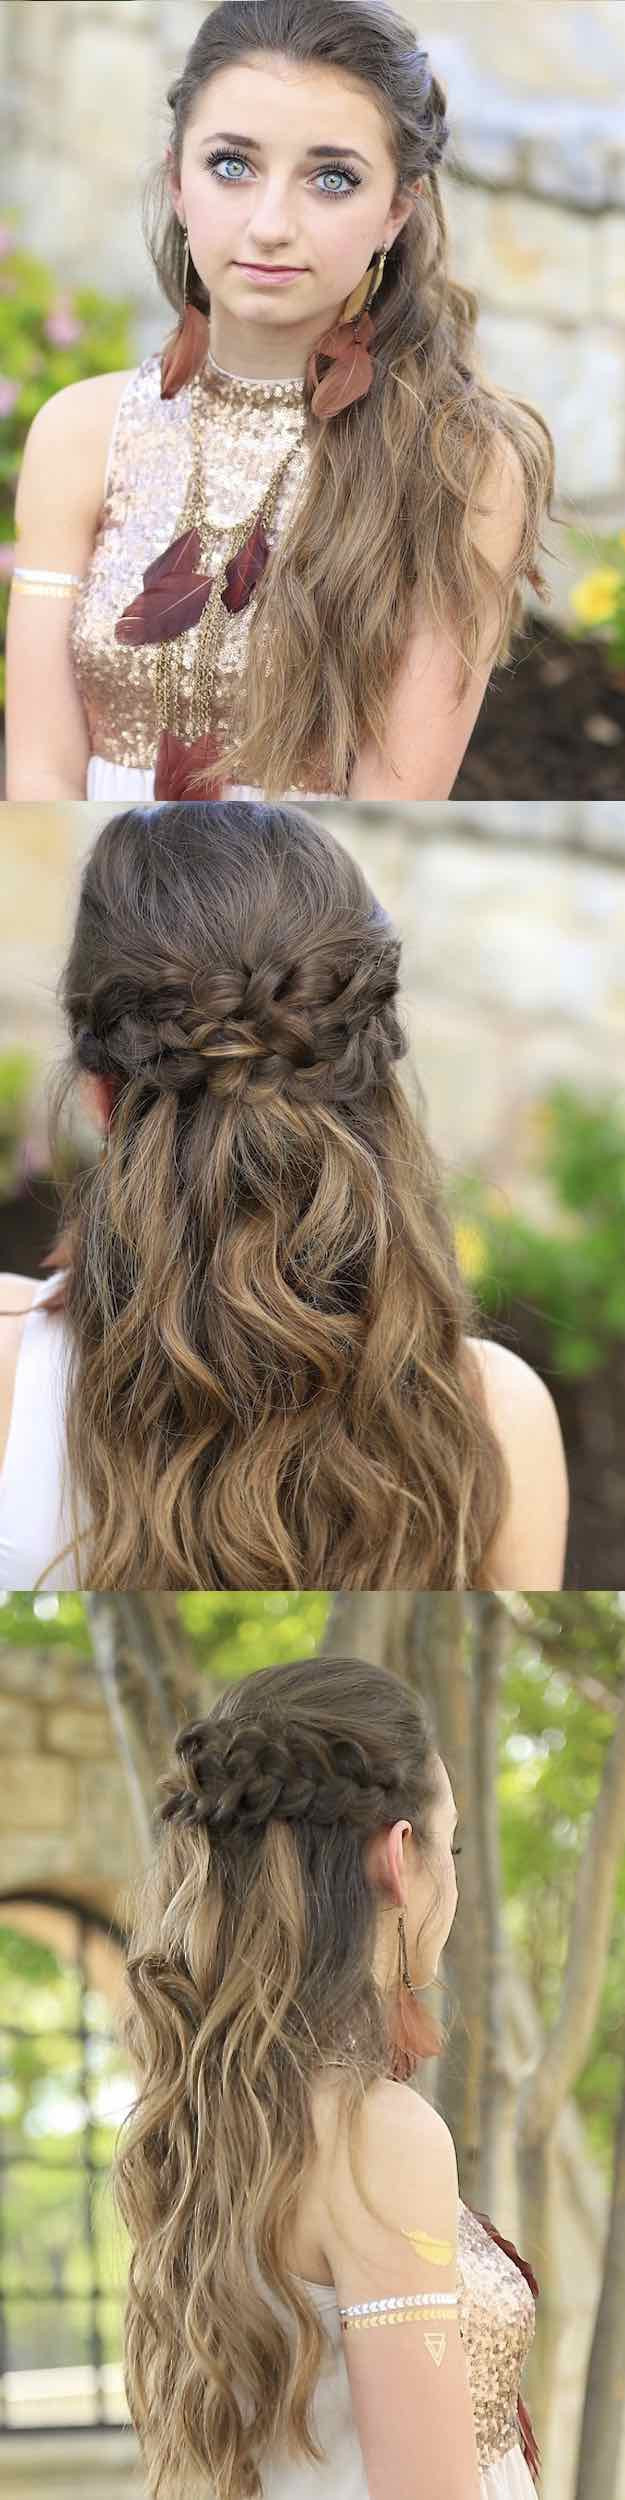 Prom Hairstyles Half Up Half Down
 25 Easy Half Up Half Down Hairstyle Tutorials For Prom